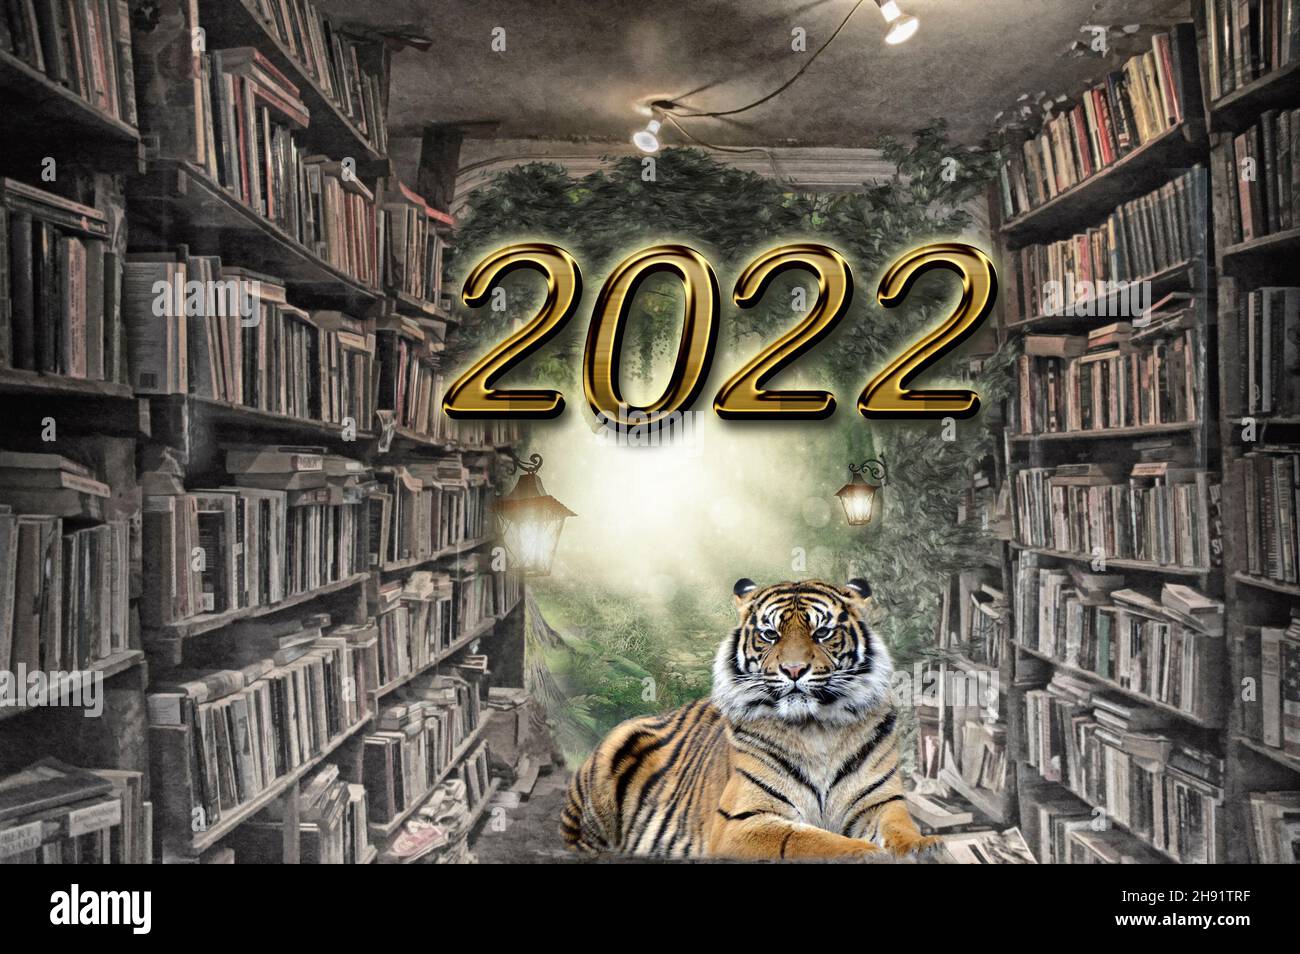 New Year pictures .Tiger, bookshelves, abstraction, fantasy,holidays Stock Photo